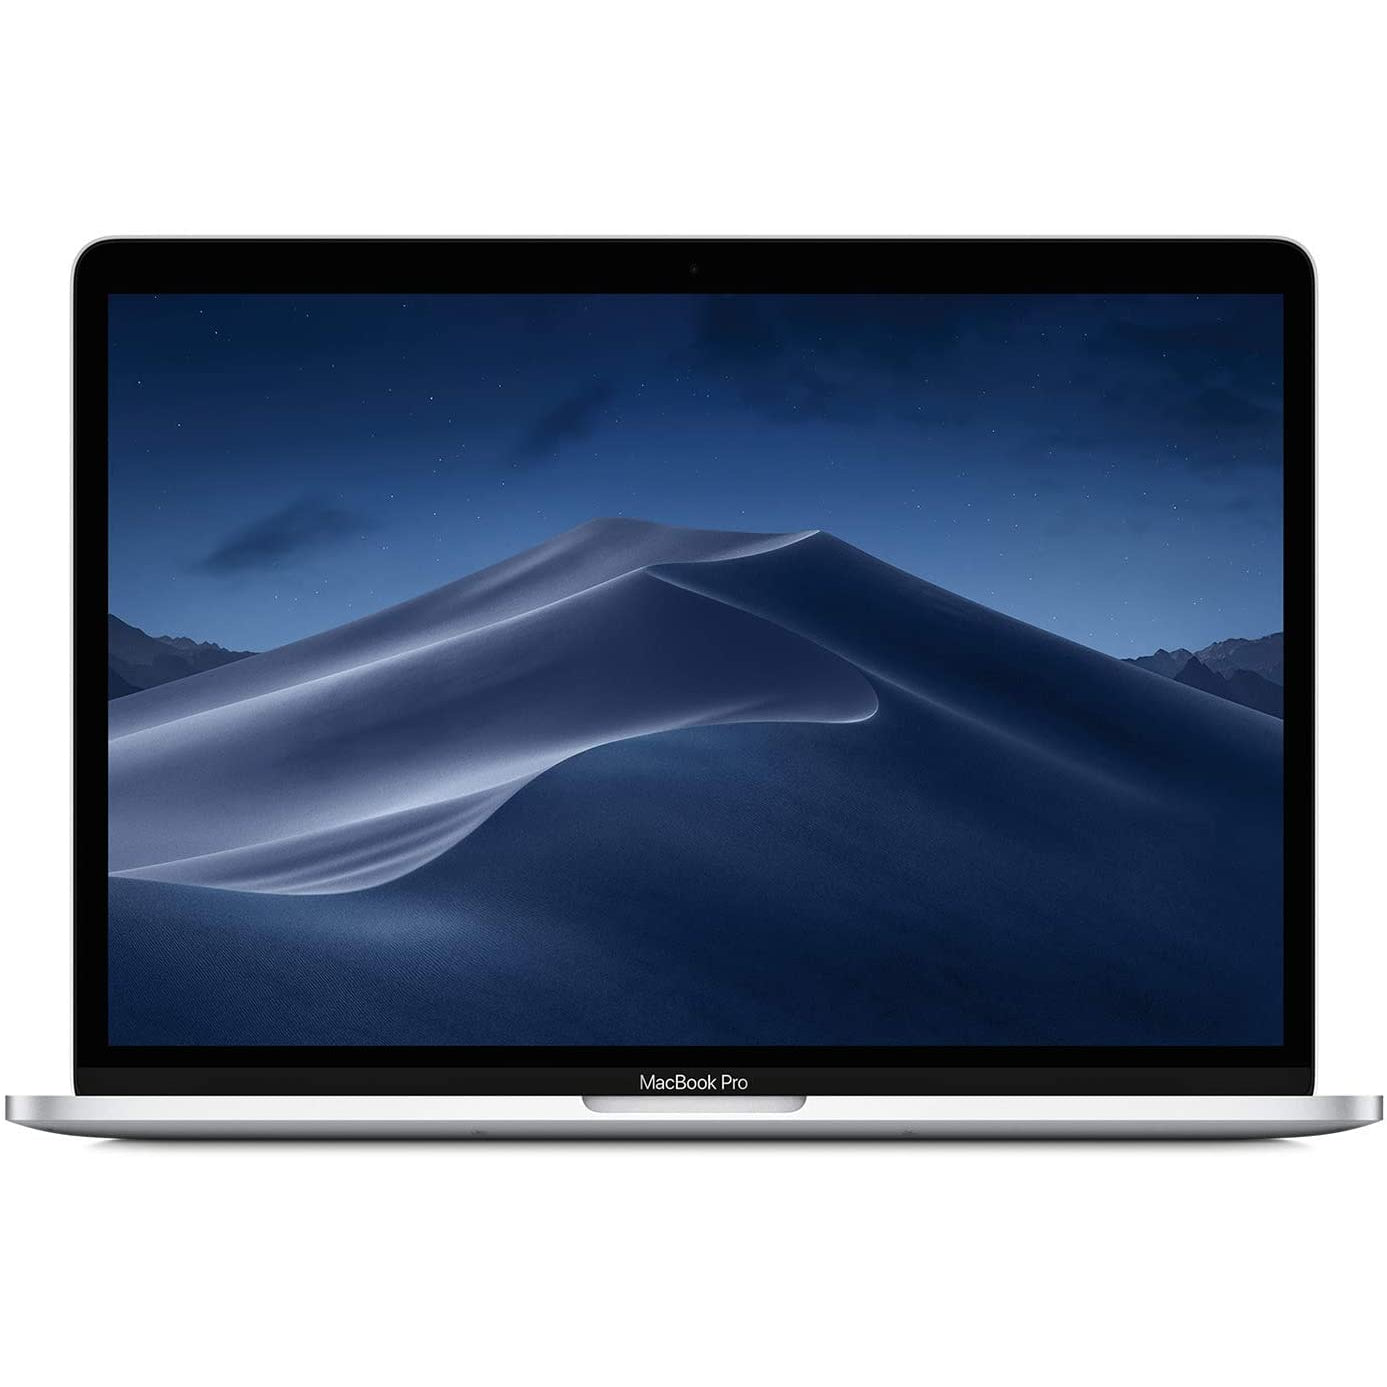 Apple MacBook Pro 13.3'' MR9R2LL/A (2018) Laptop, Intel Core i5, 8GB RAM, 512GB SSD, Space Grey with Touch Bar